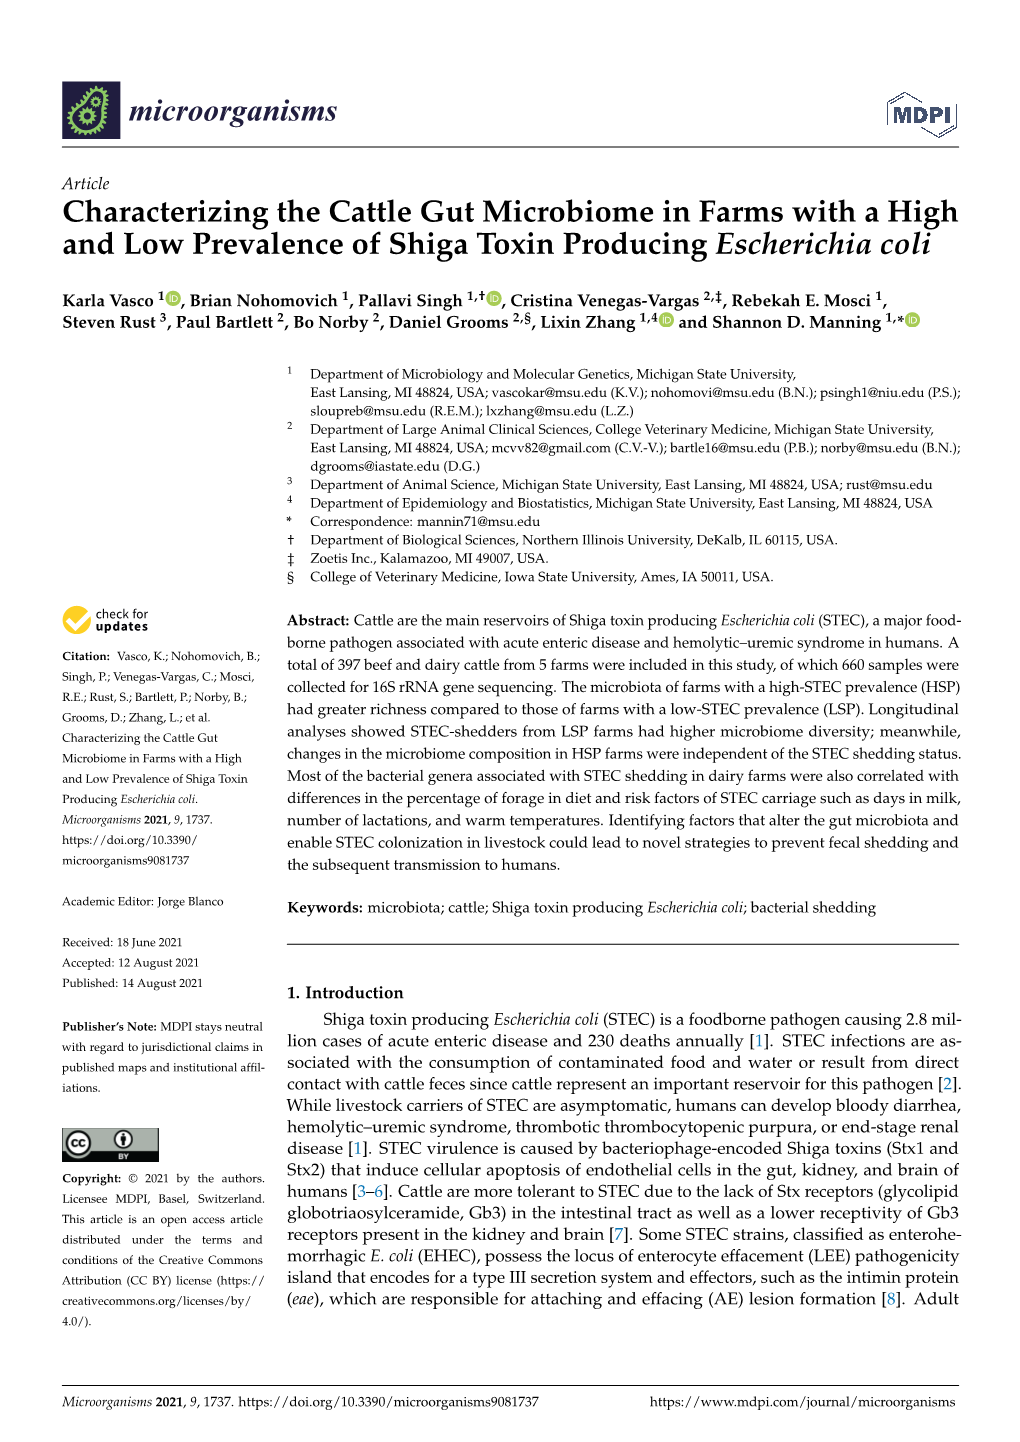 Characterizing the Cattle Gut Microbiome in Farms with a High and Low Prevalence of Shiga Toxin-Producing Escherichia Coli